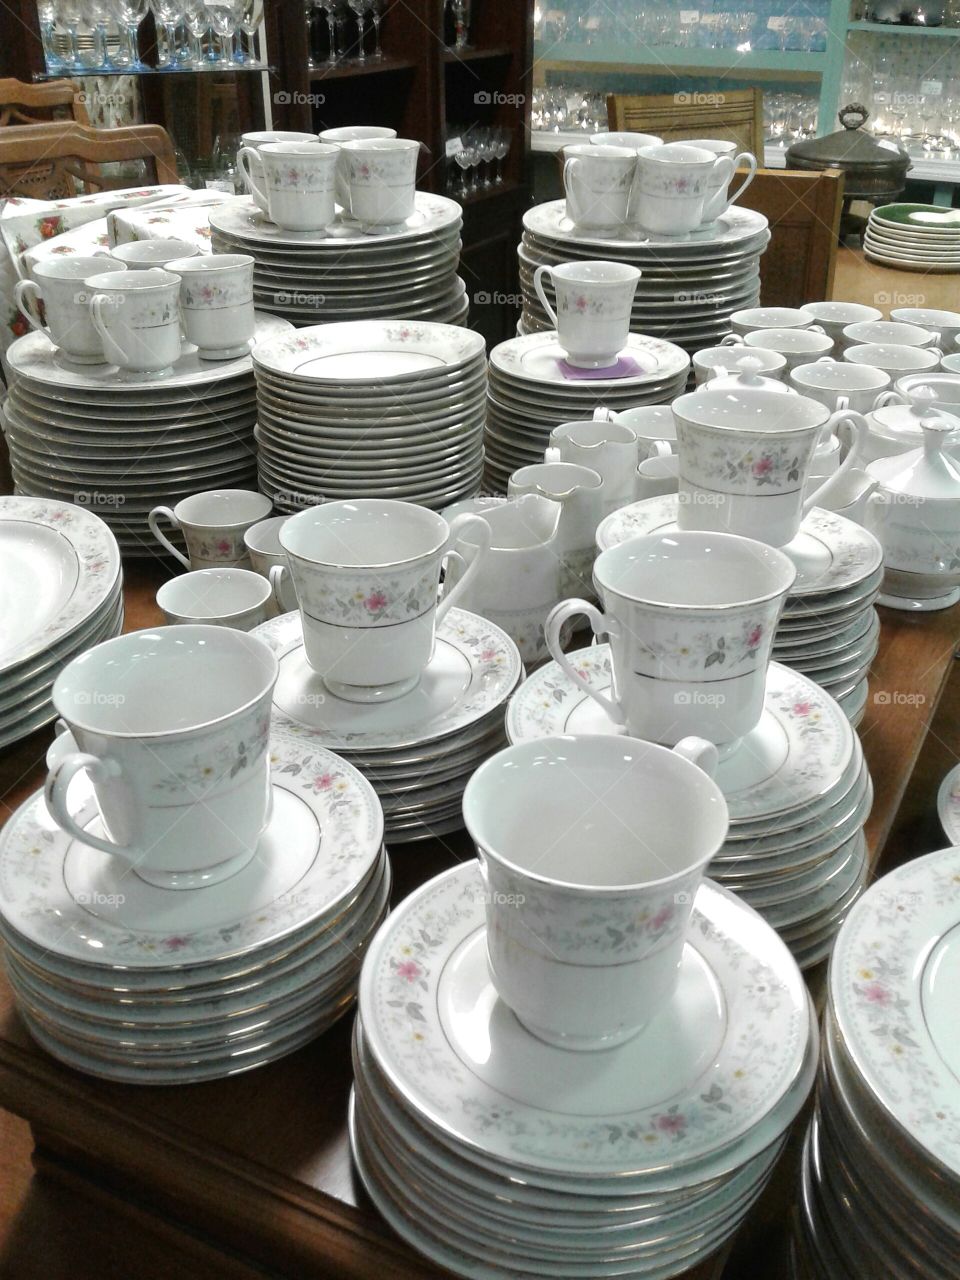 Plates, Cups and Saucers